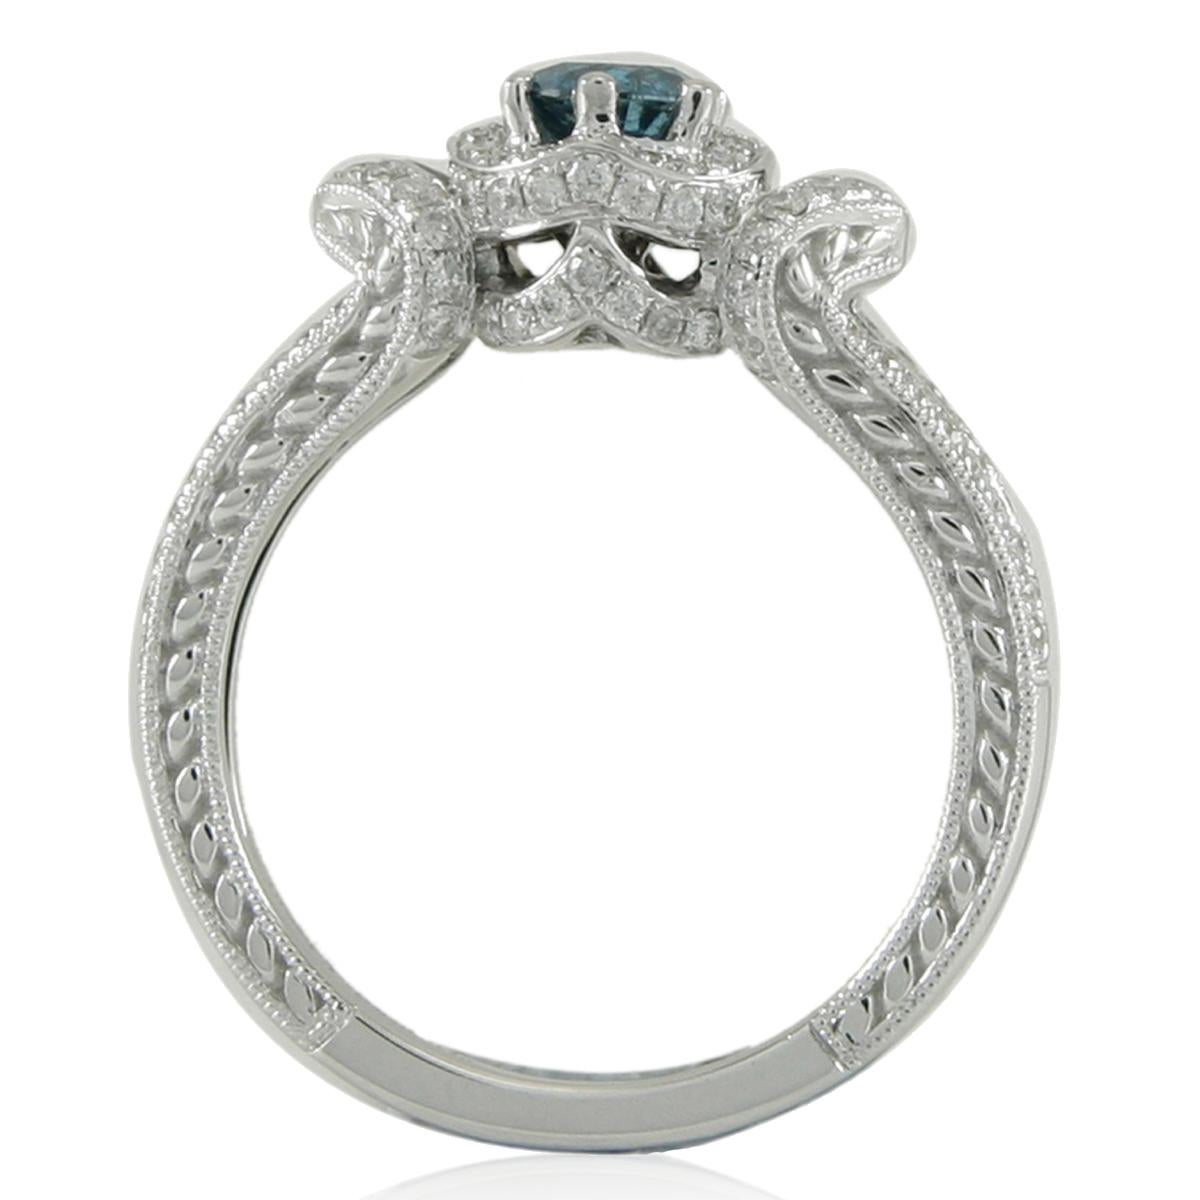 This strikingly gorgeous engagement ring by Suzy Levian is elegantly crafted in 14K white gold featuring a brilliant-cut round blue diamond center stone (0.42ct). This diamond ring features artistic pave diamond artwork all across the band, as it